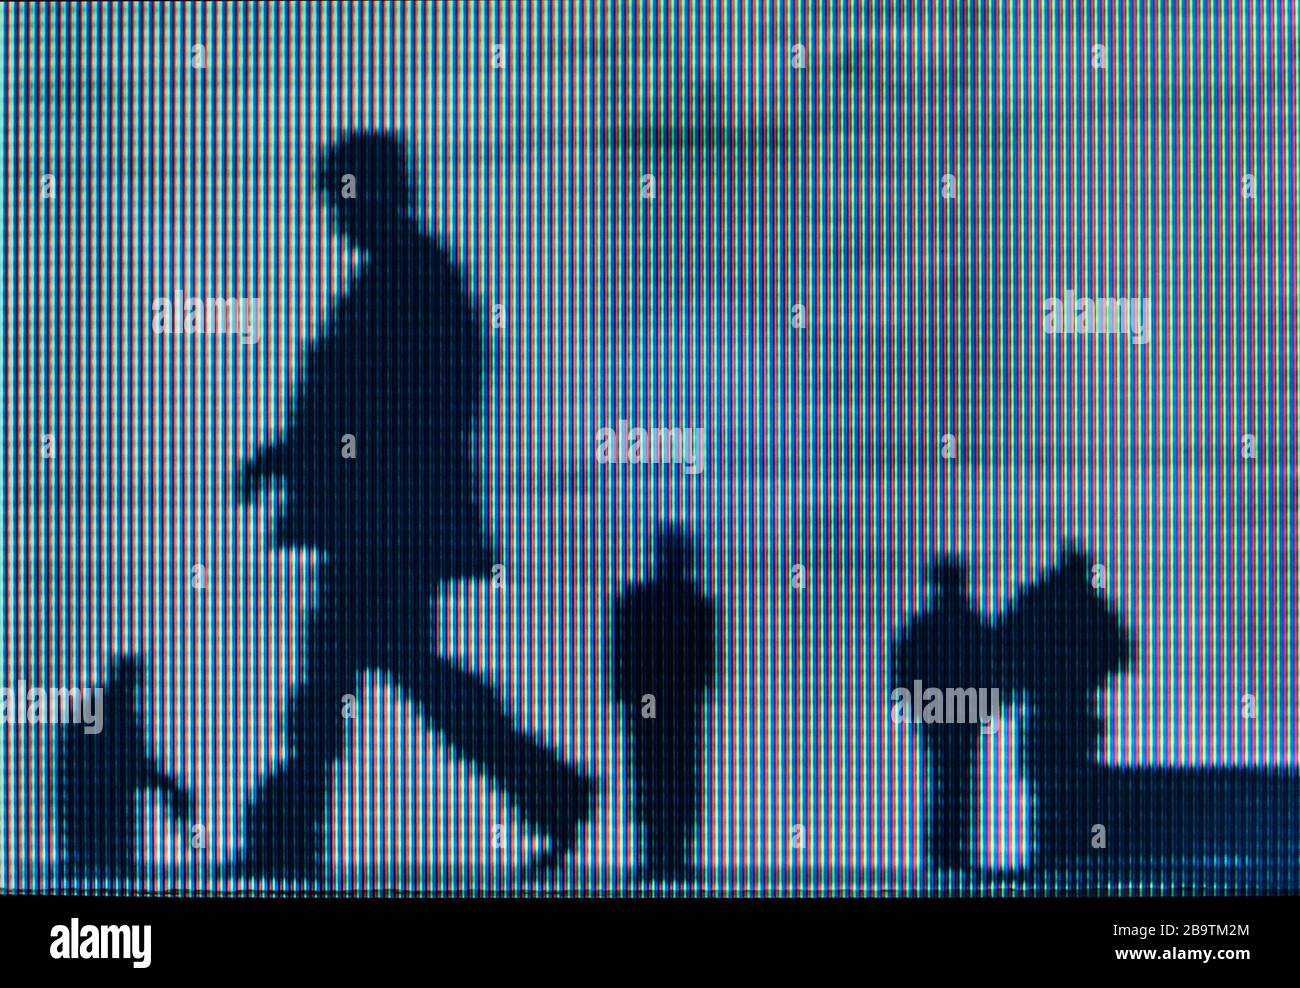 LCD screen image of people walking in city Stock Photo